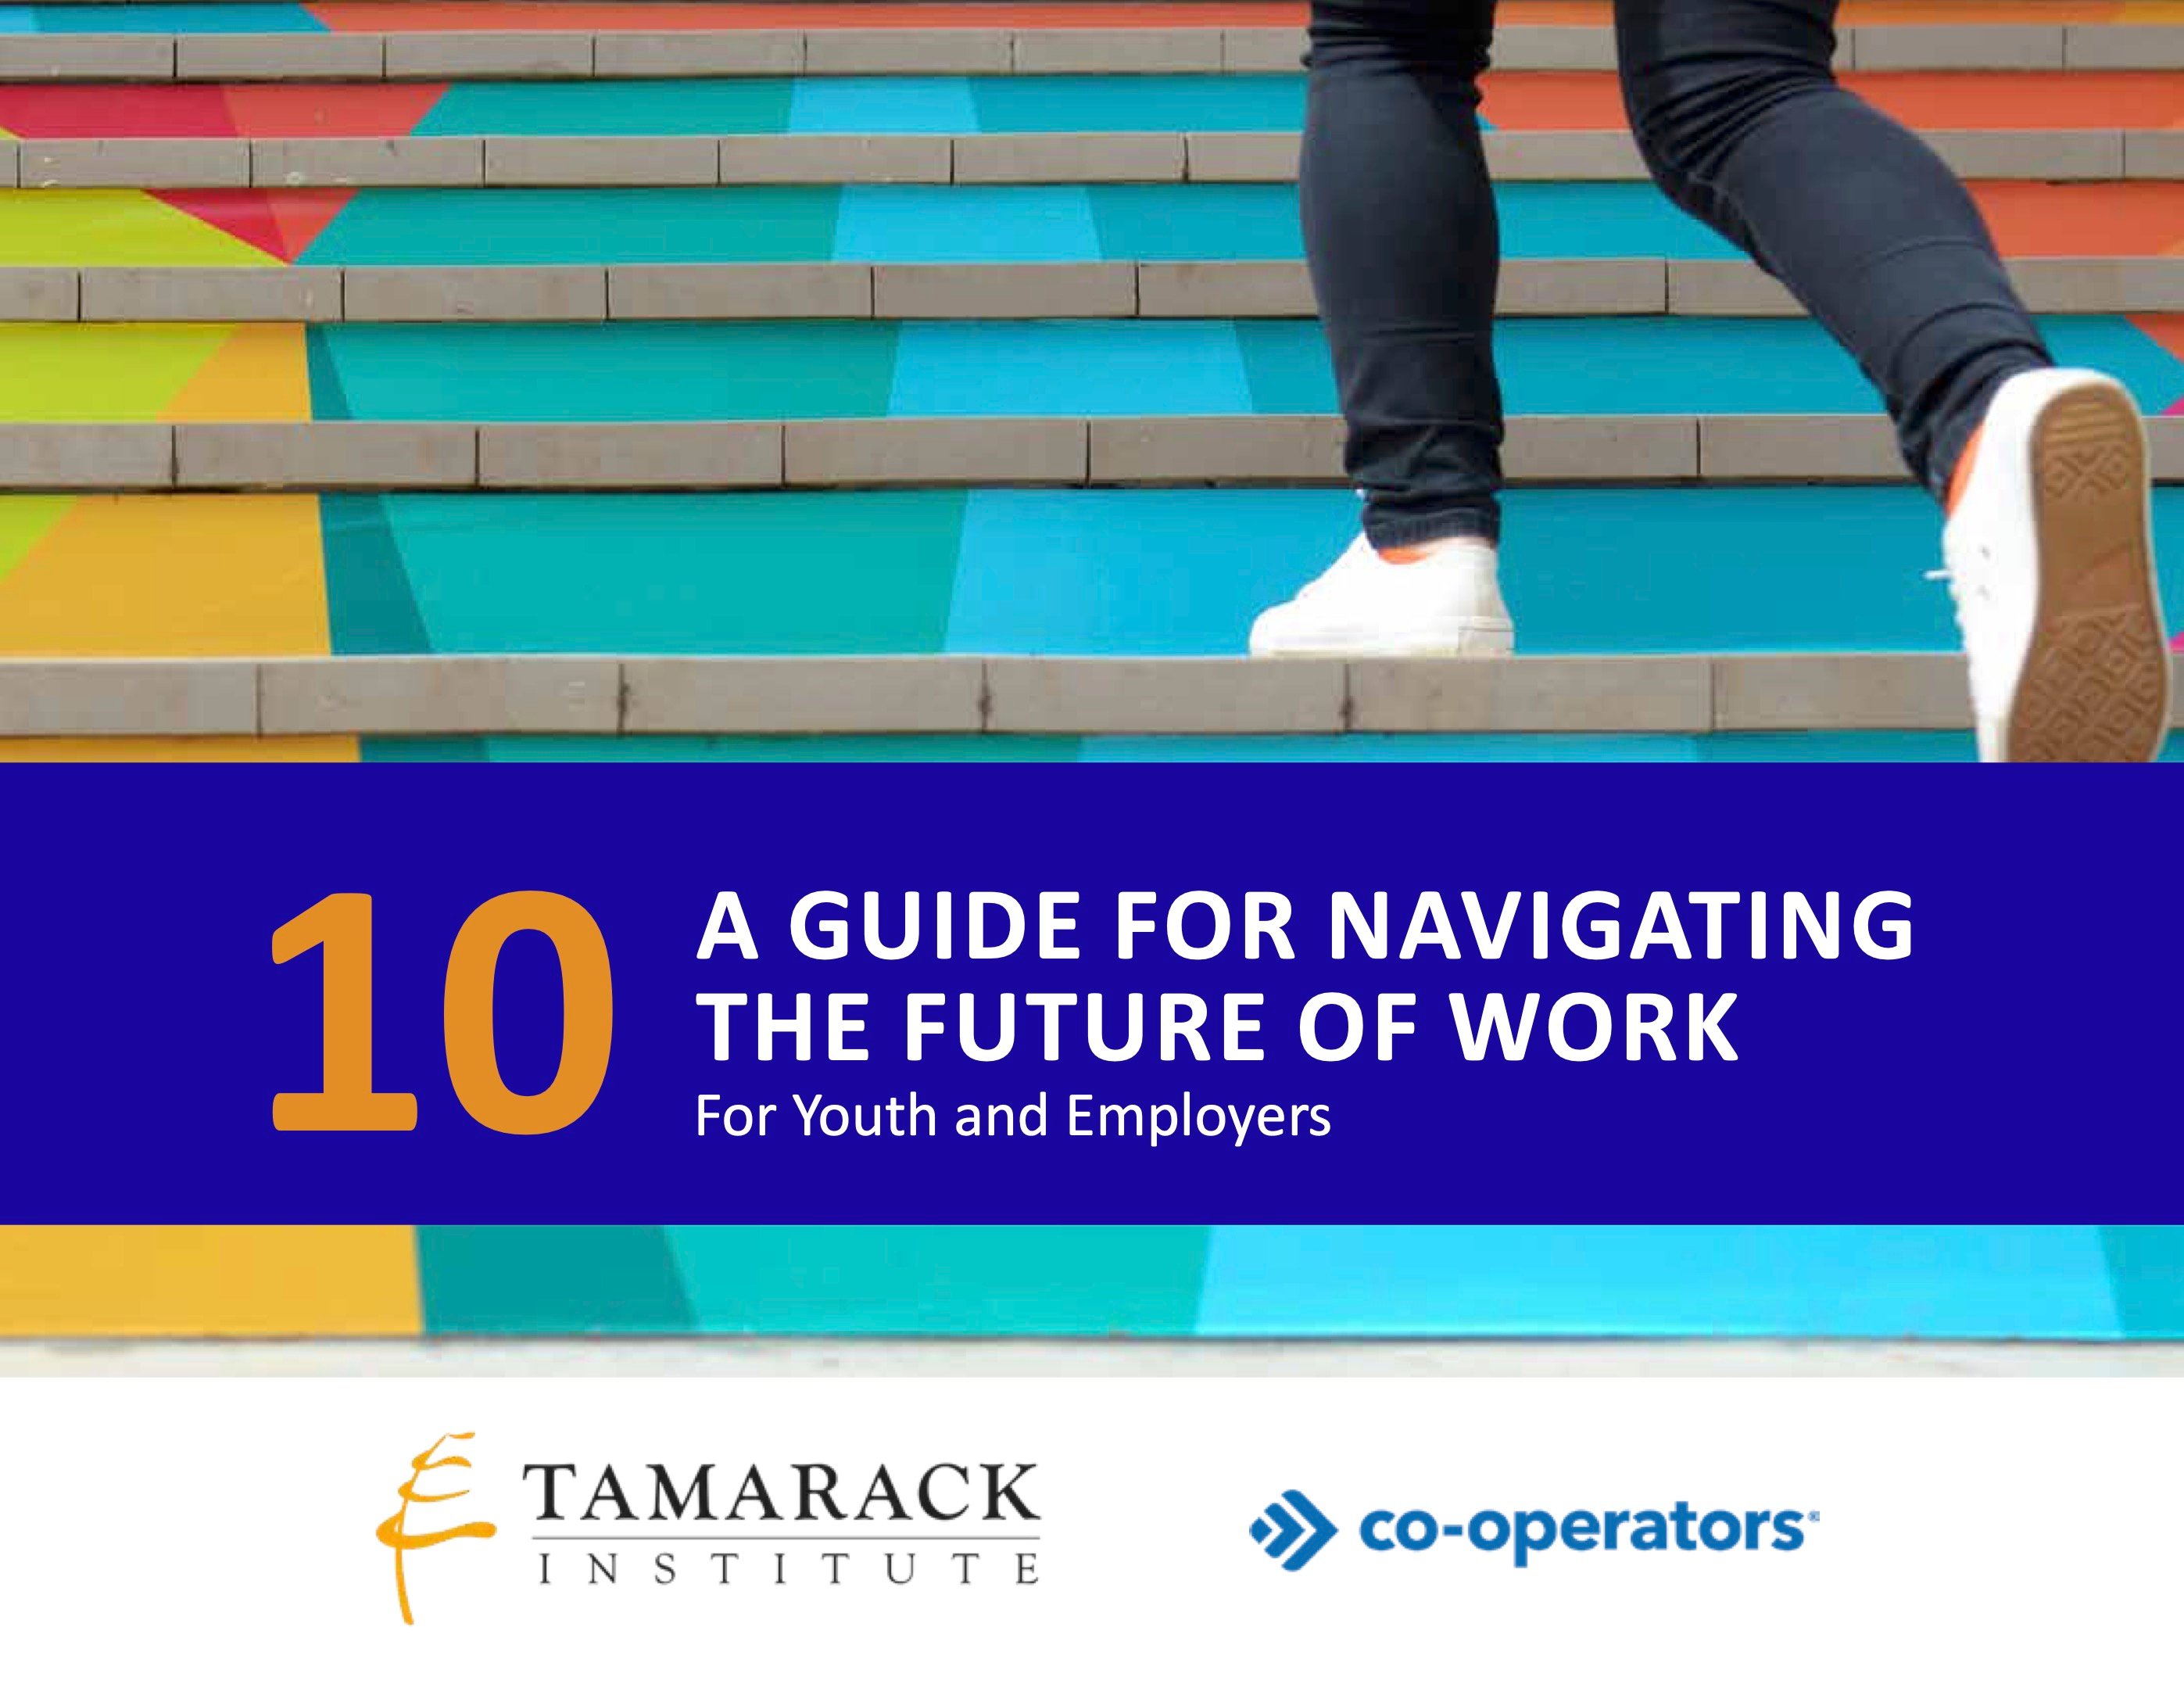 10 - A Guide For Navigating The Future Of Work For Youth And Employers